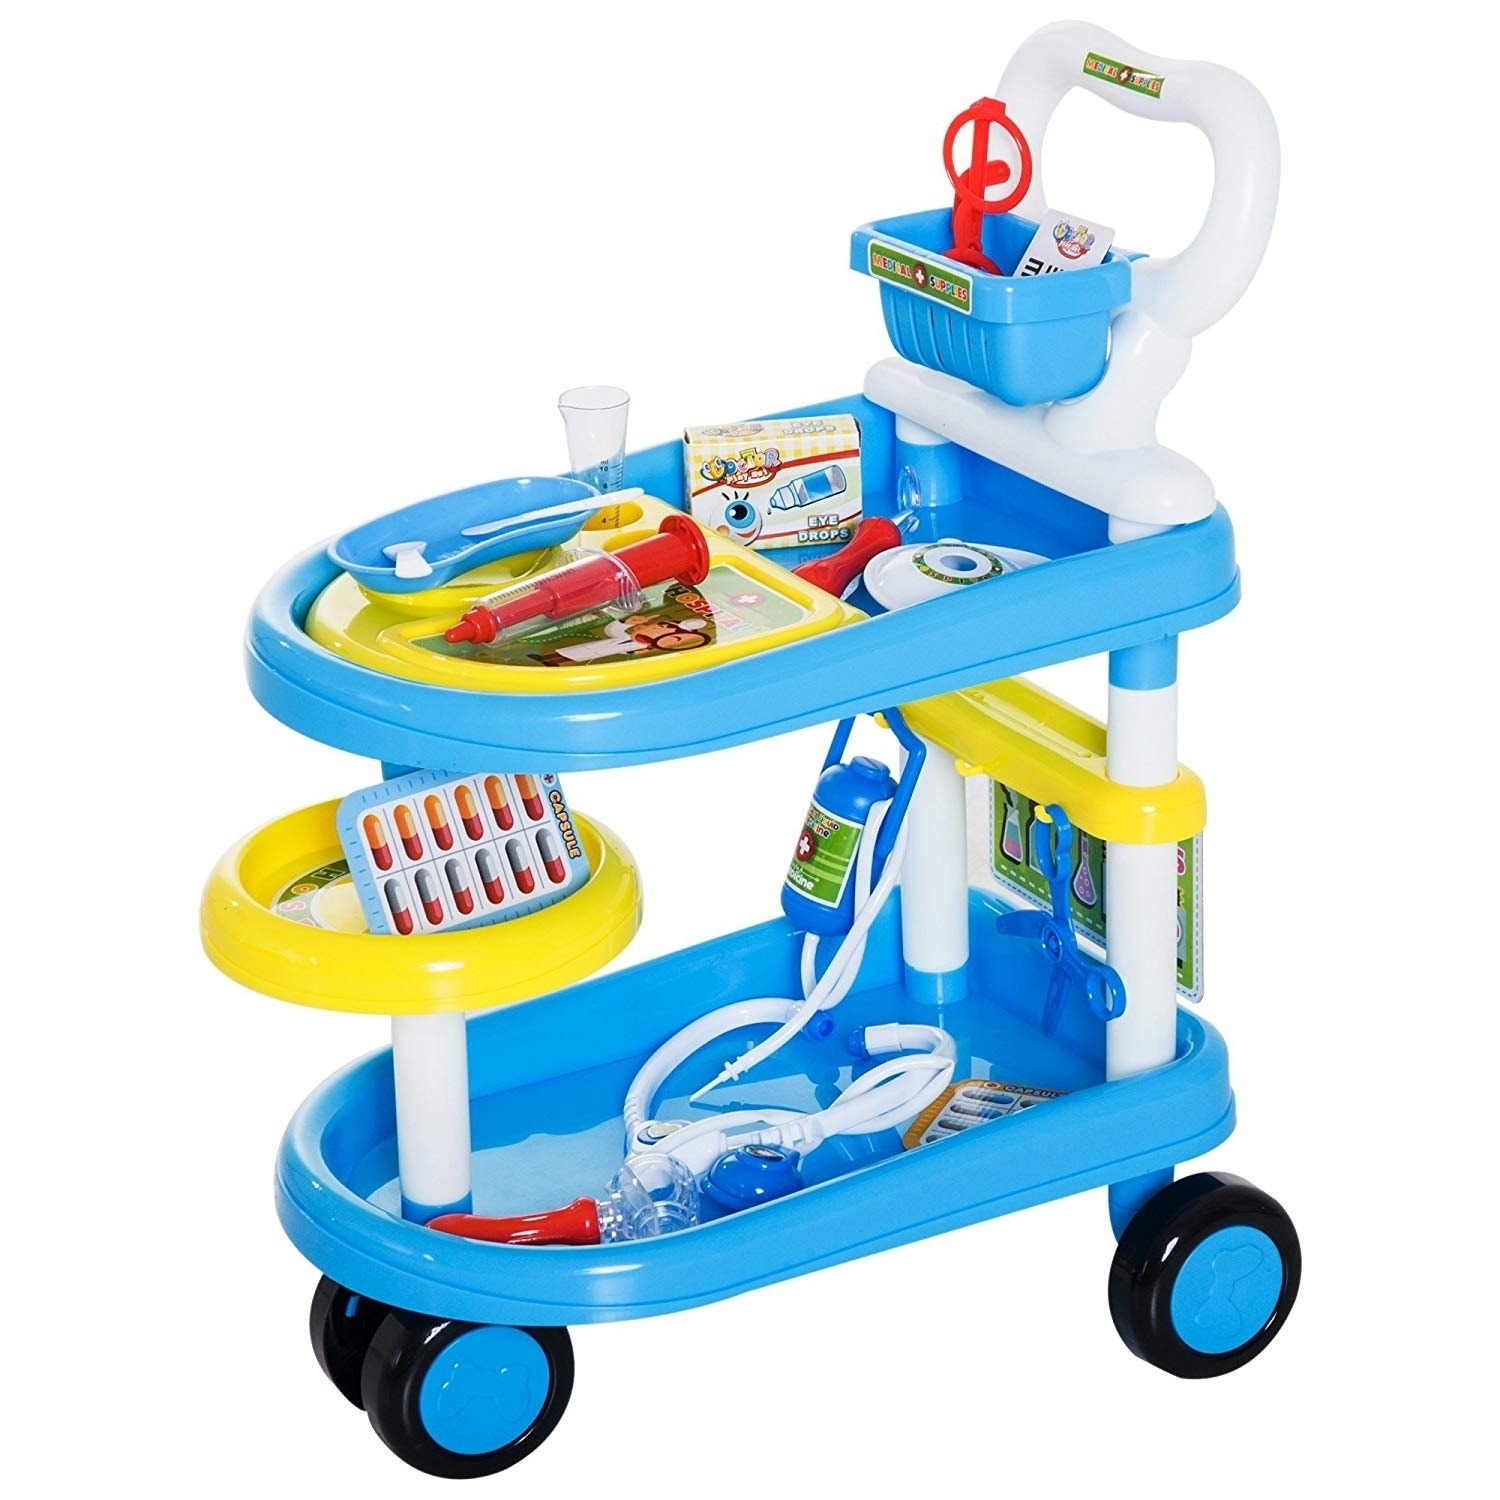 doctor trolley playset